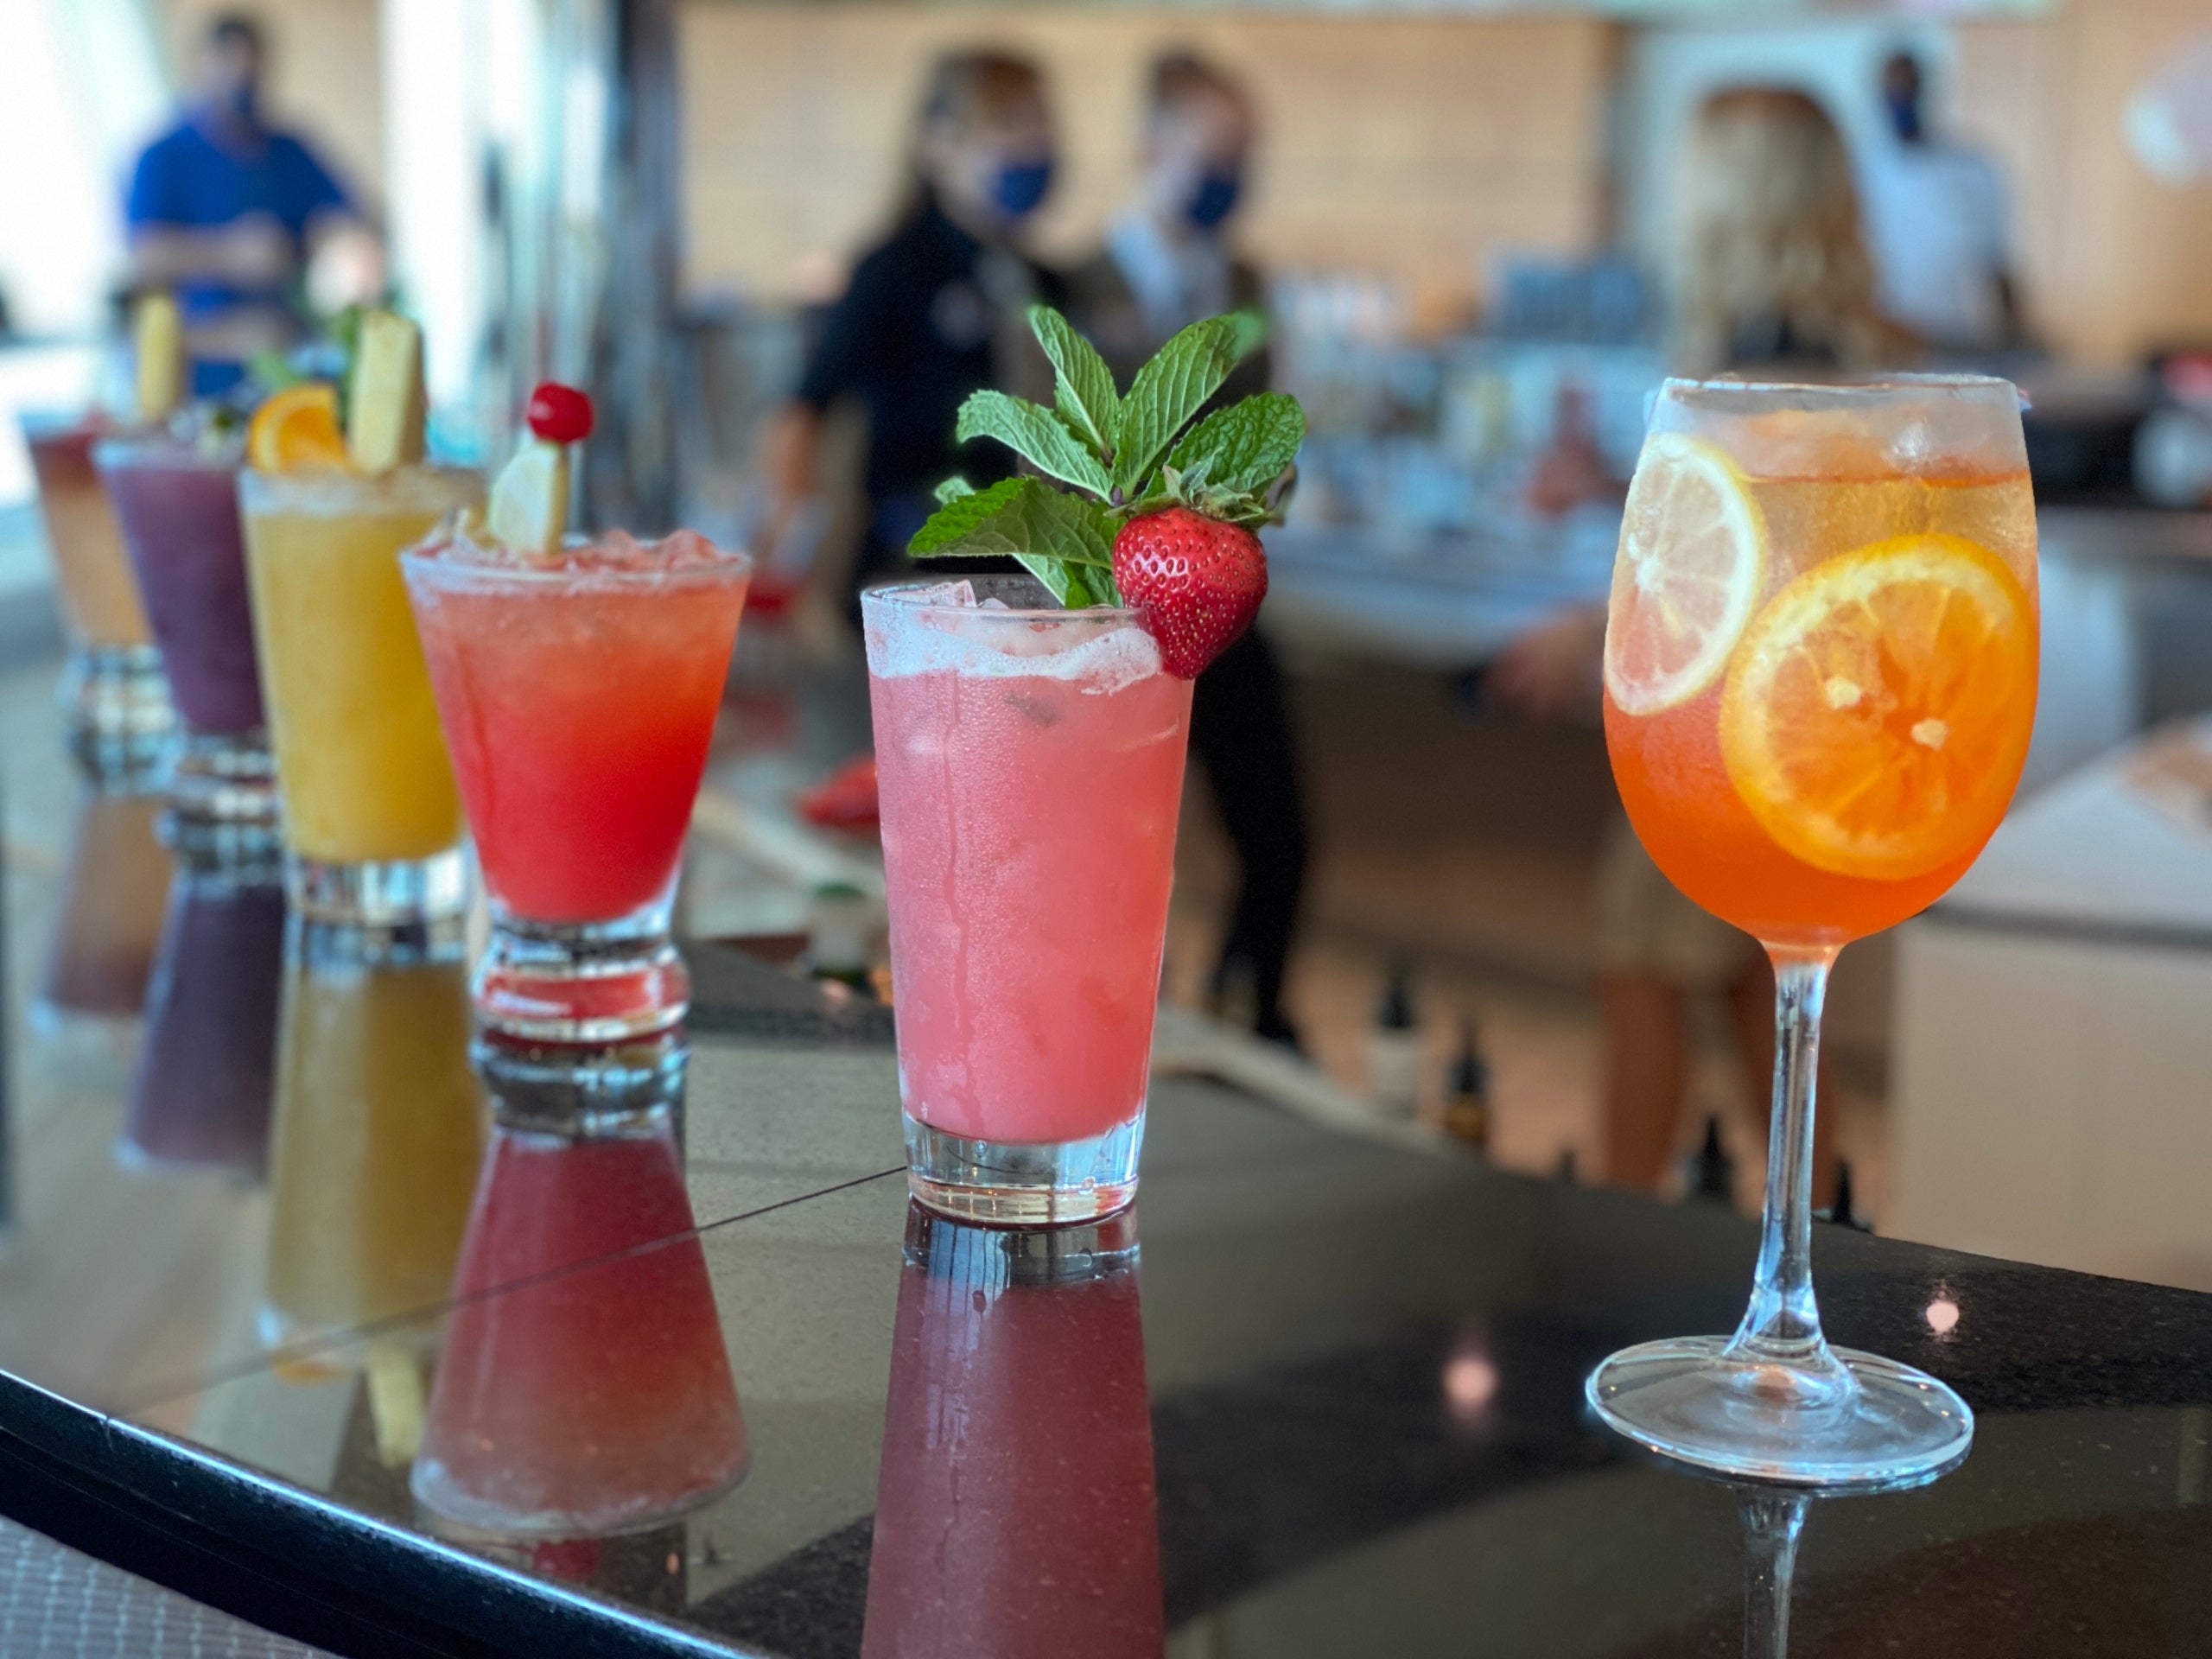 carnival cruise drink package gratuity